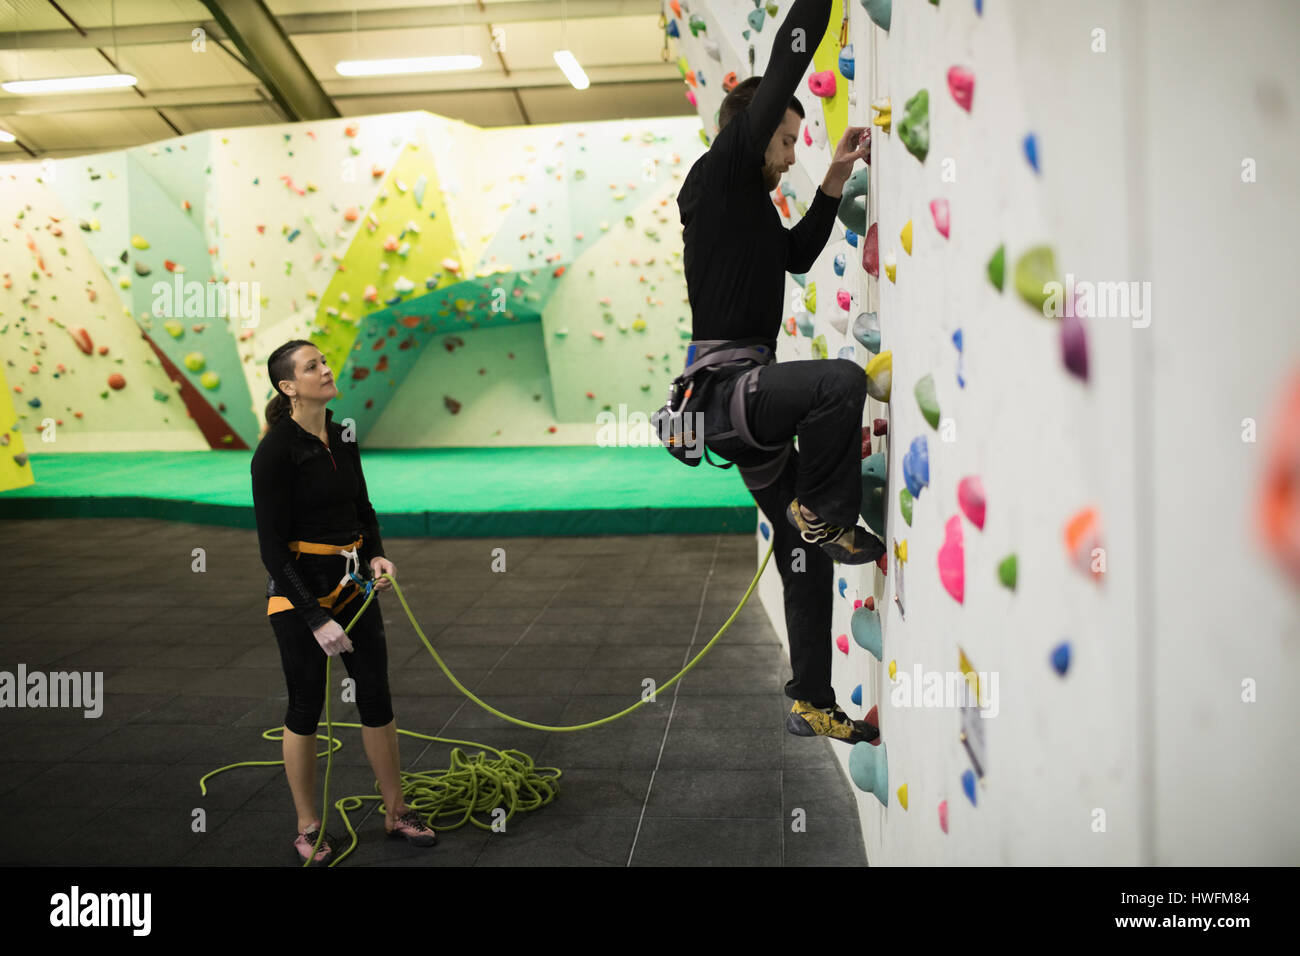 Trainer assisting man while climbing on artificial wall in gym Stock Photo